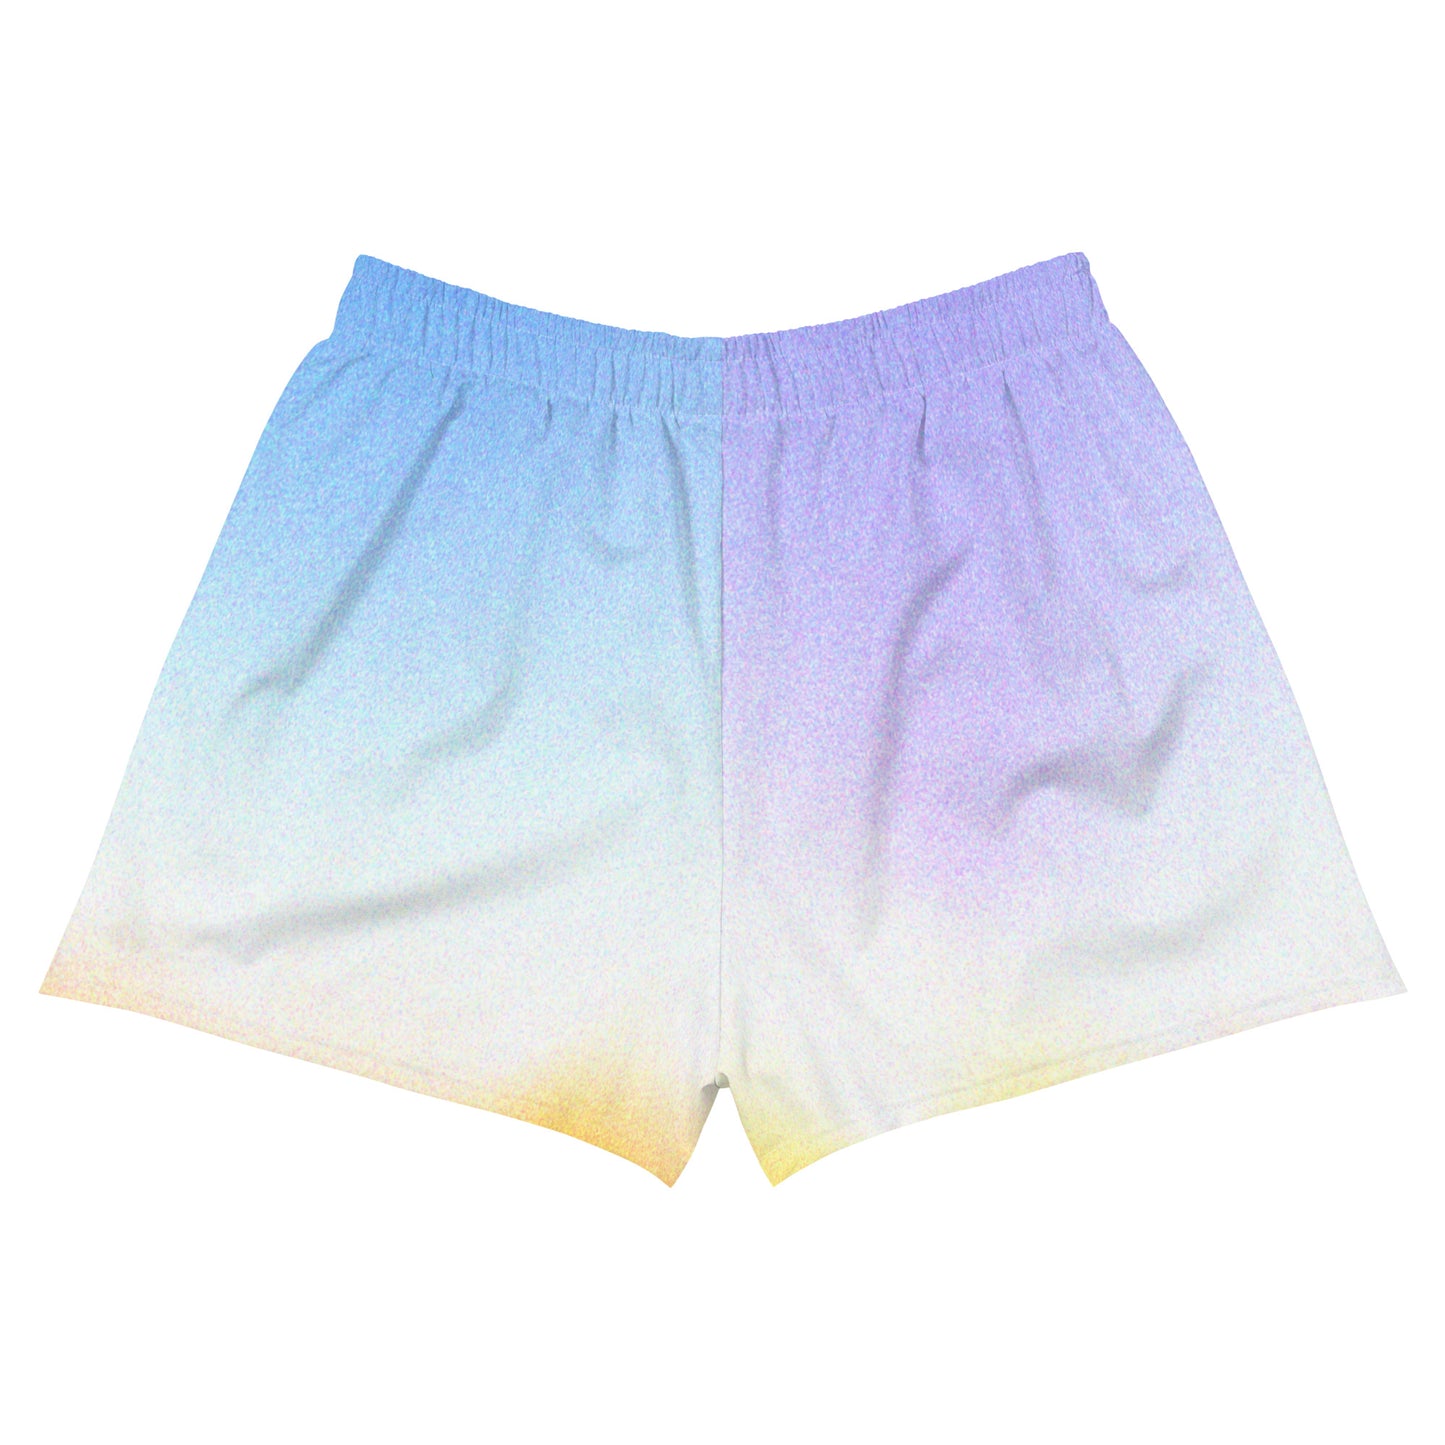 Over the Sunset Athletic Shorts